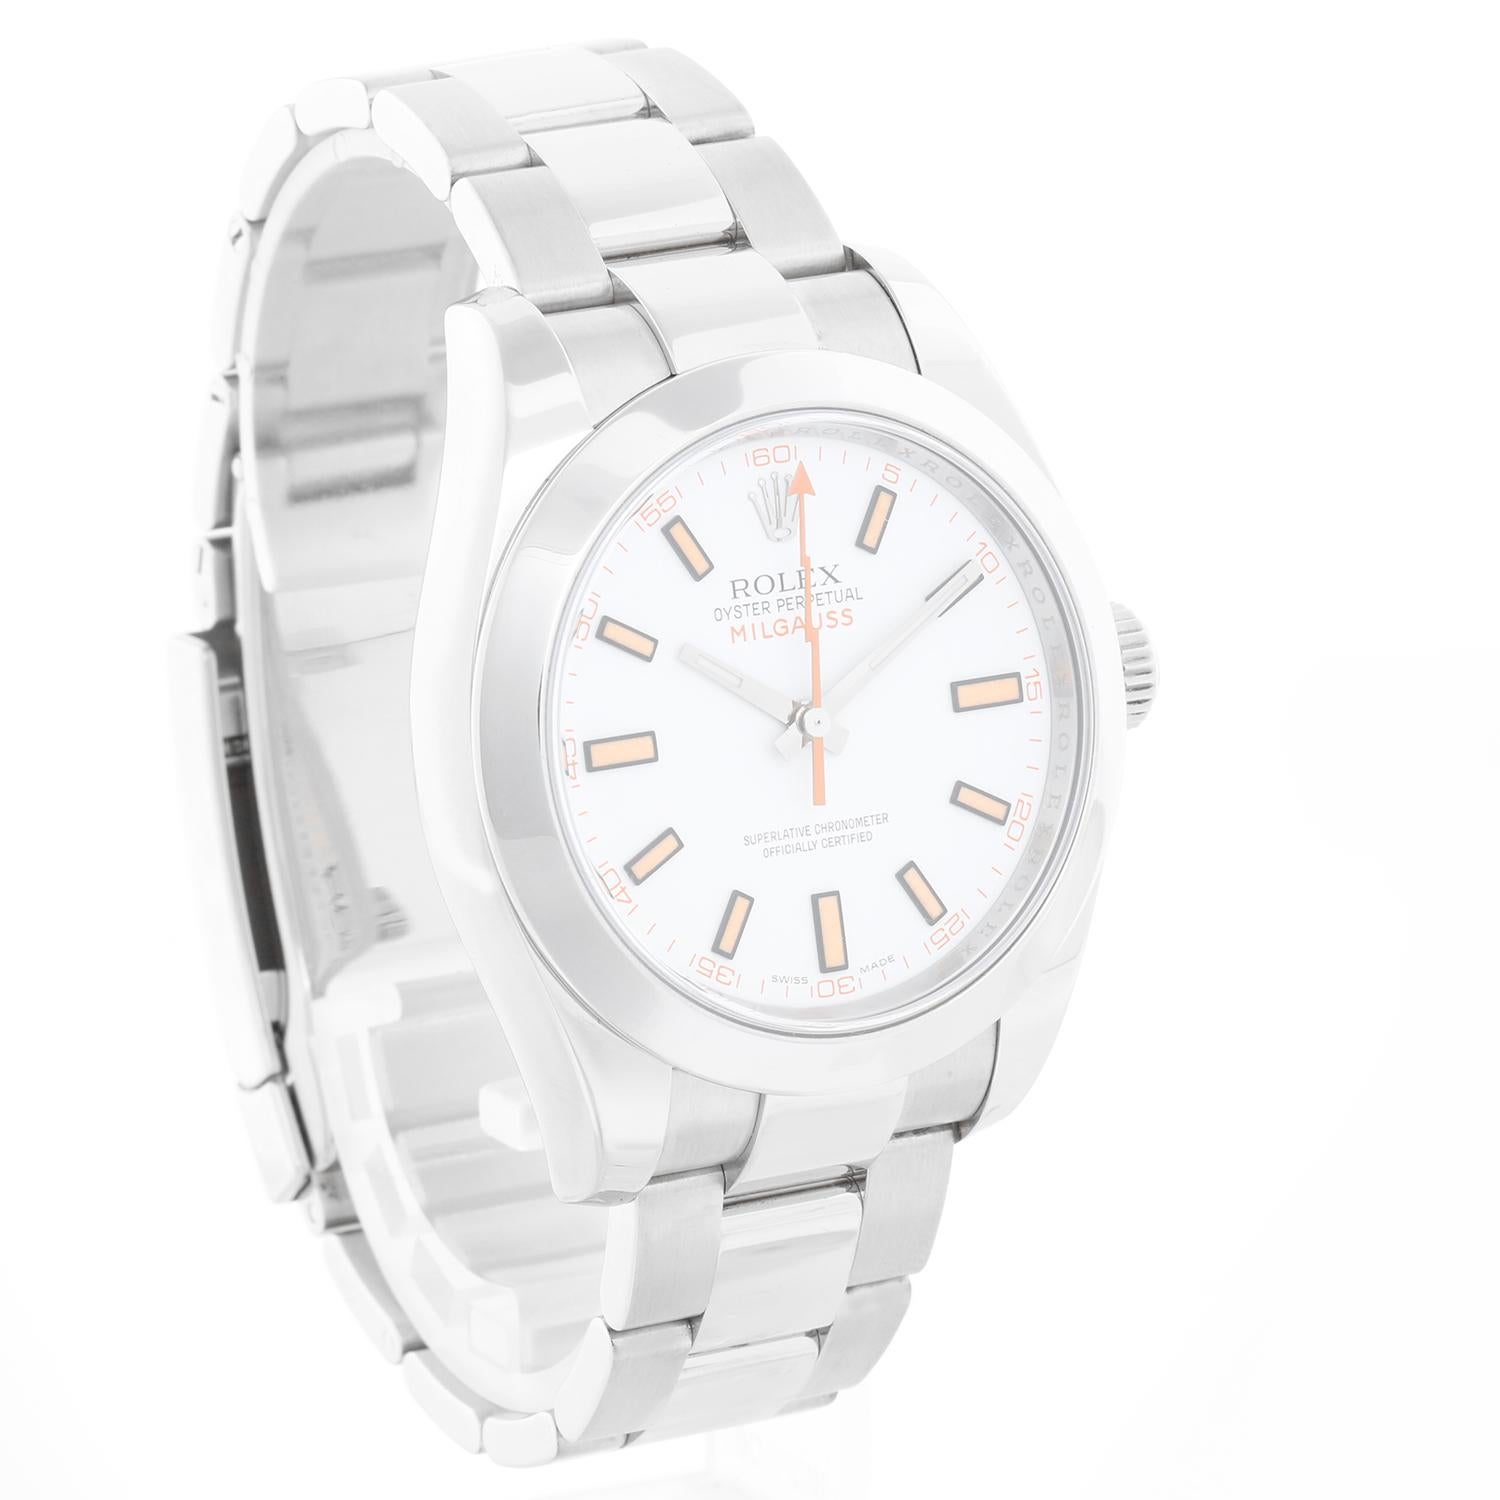 Rolex Milgauss Stainless Steel Men's Watch White Dial 116400 For Sale 1